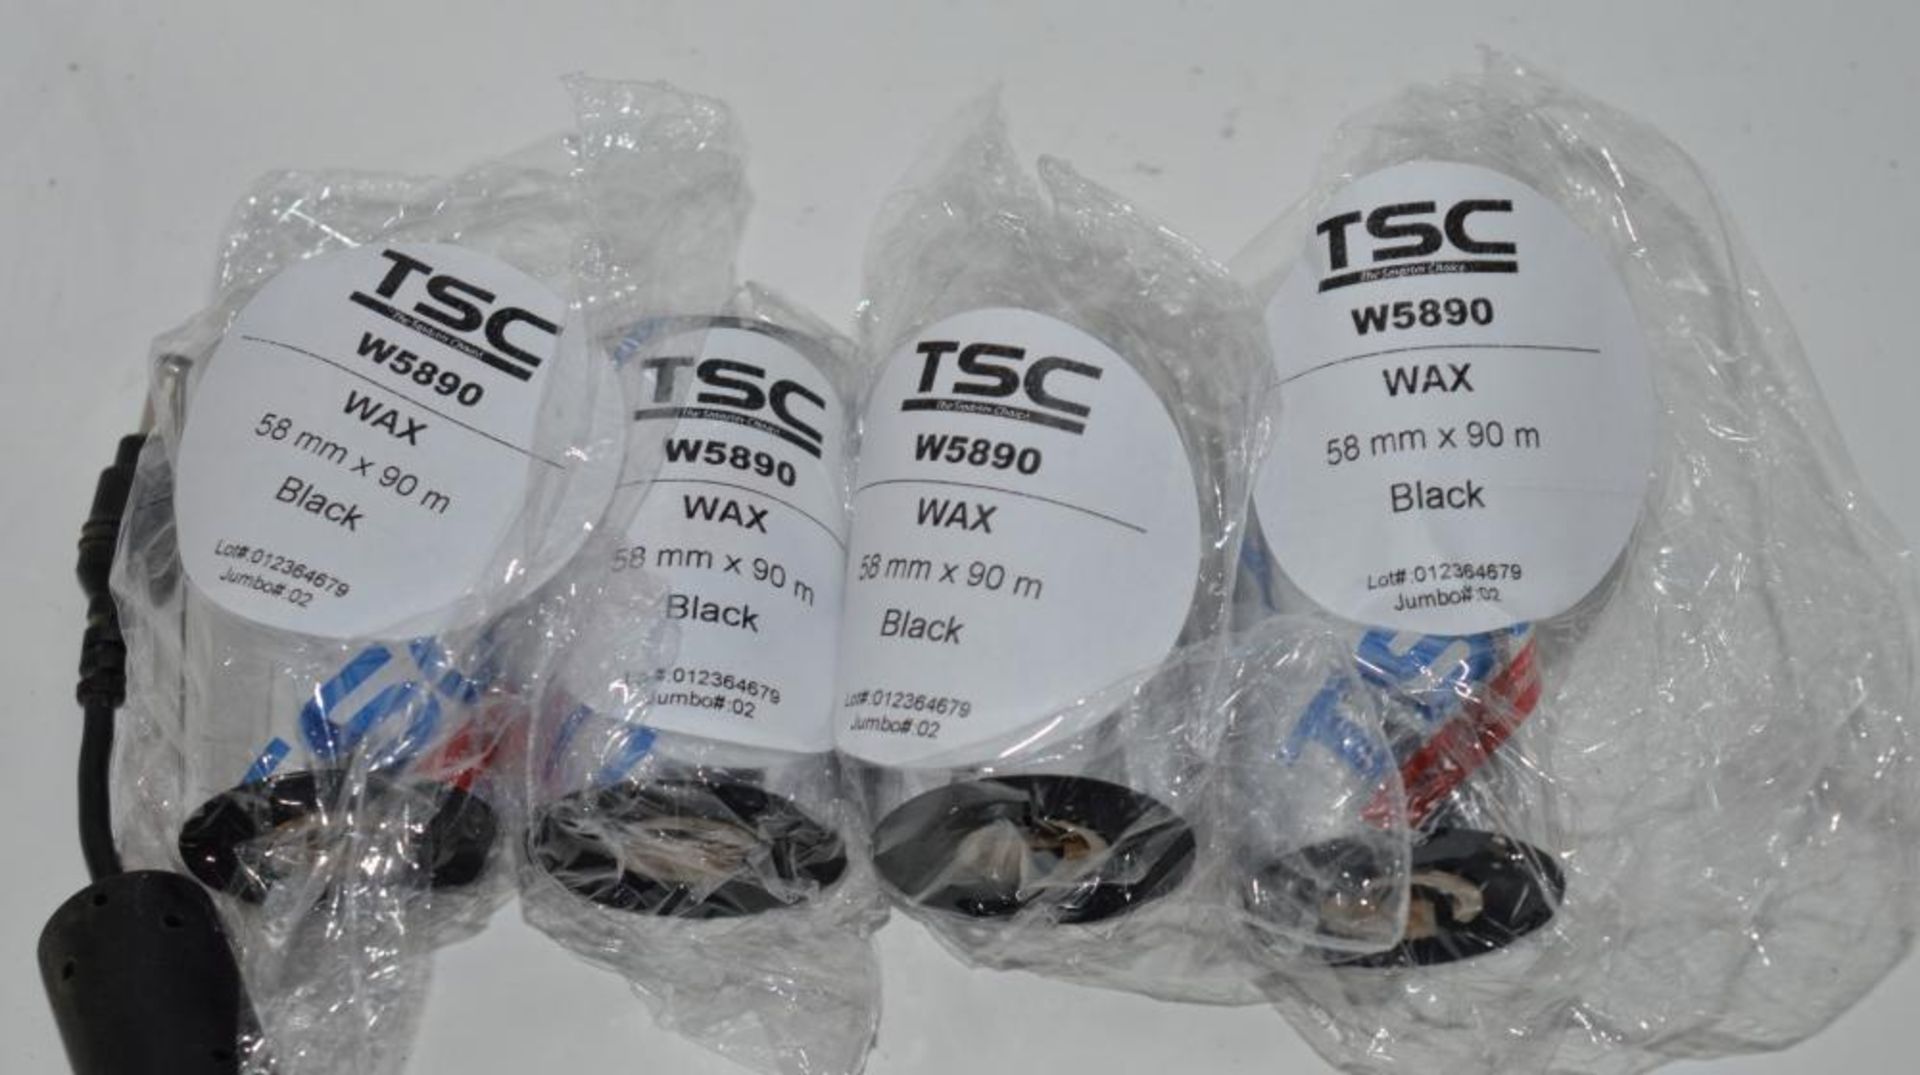 1 x TSC TTP-225 Label Barcode Printer With KP-200 Keyboard, Power Supply, 4 x Rolls of W5890 Wax and - Image 2 of 9